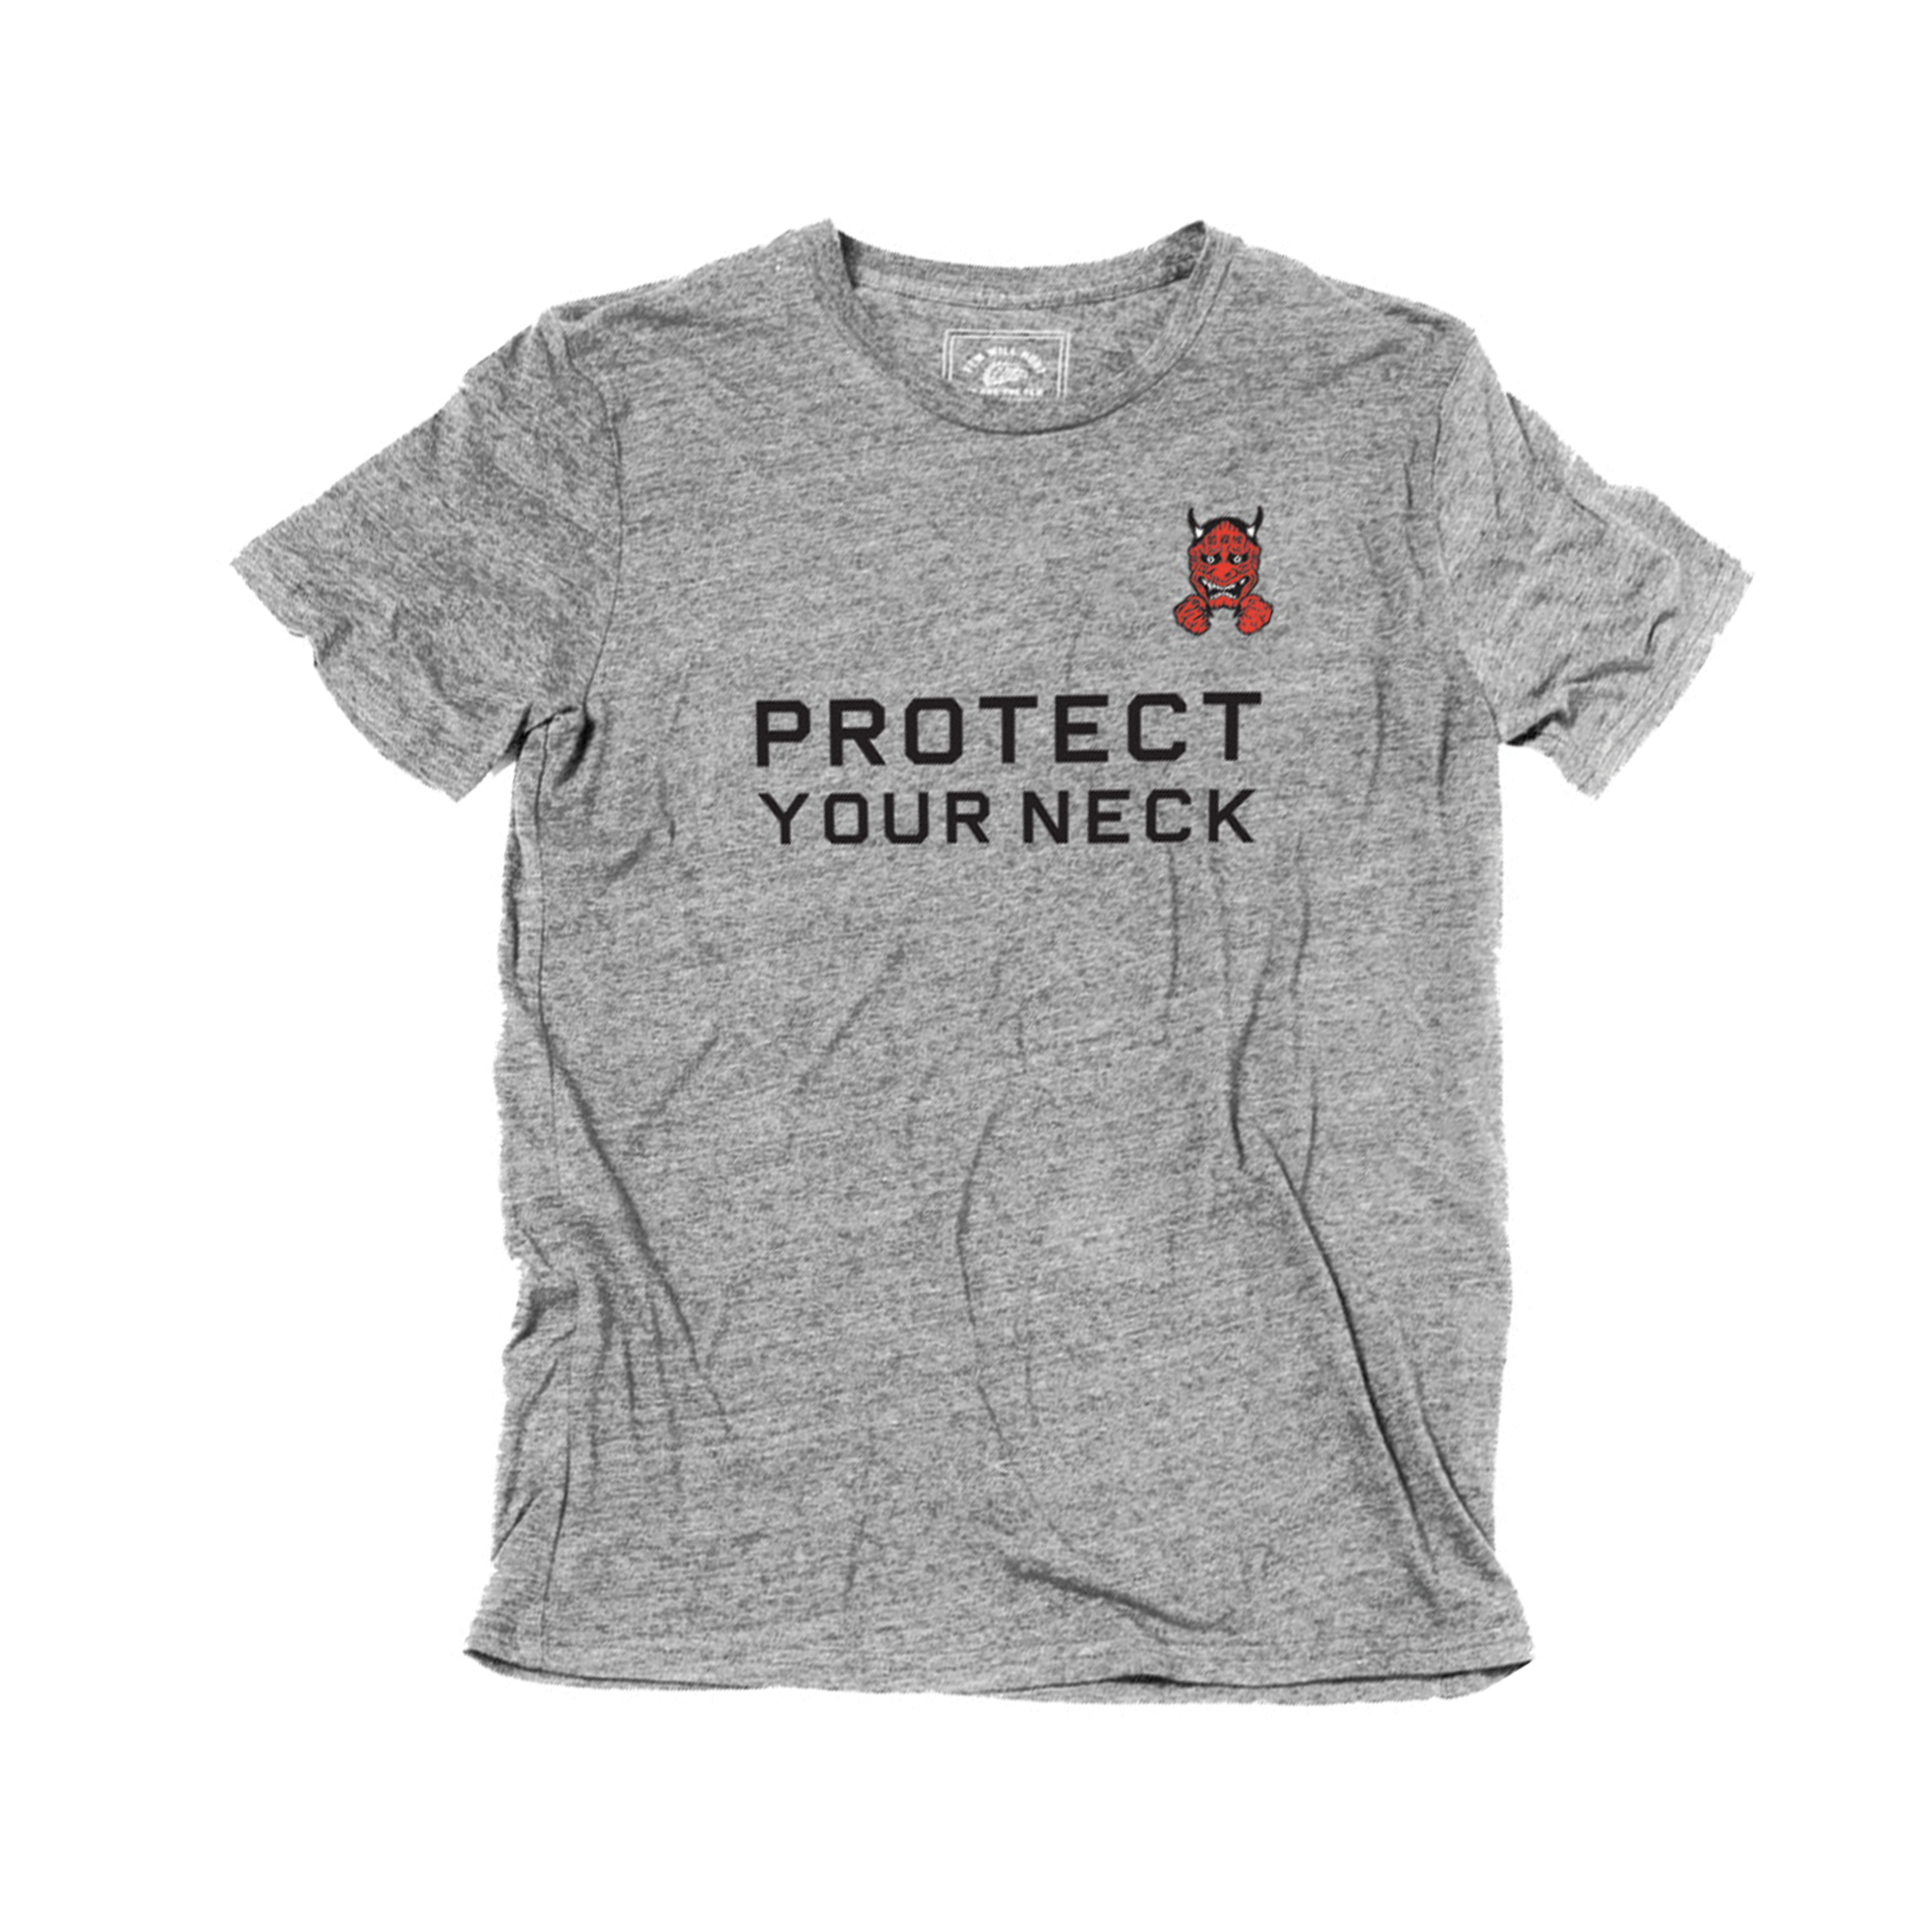 Protect Your Neck Tee